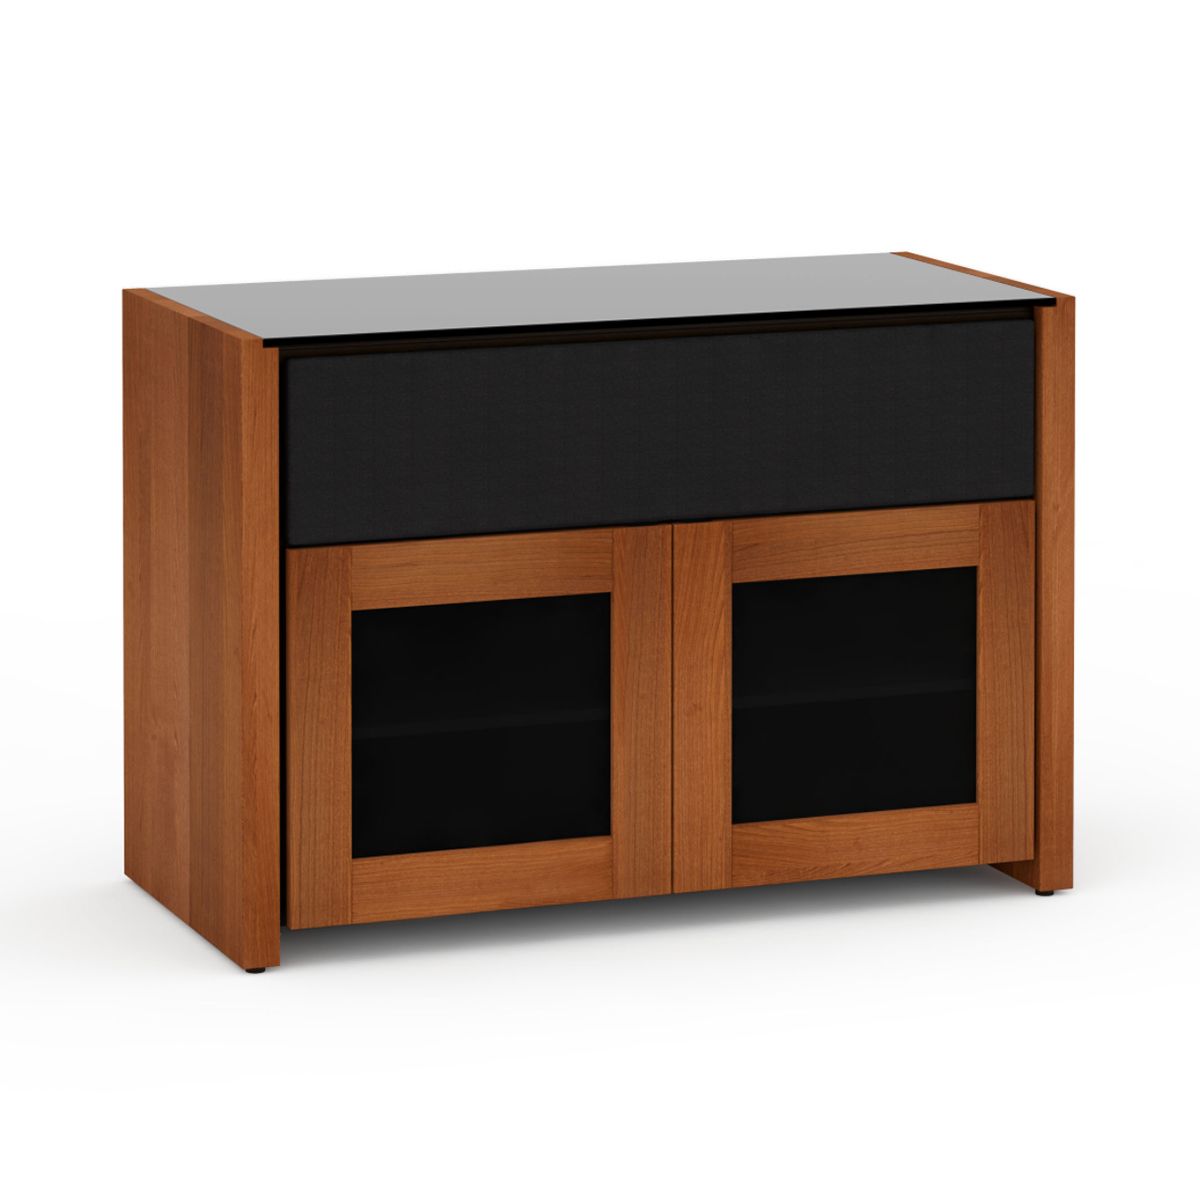 Salamander Designs Corsica 329 Twin-Width AV Cabinet With Center Speaker Opening- American Cherry- front view